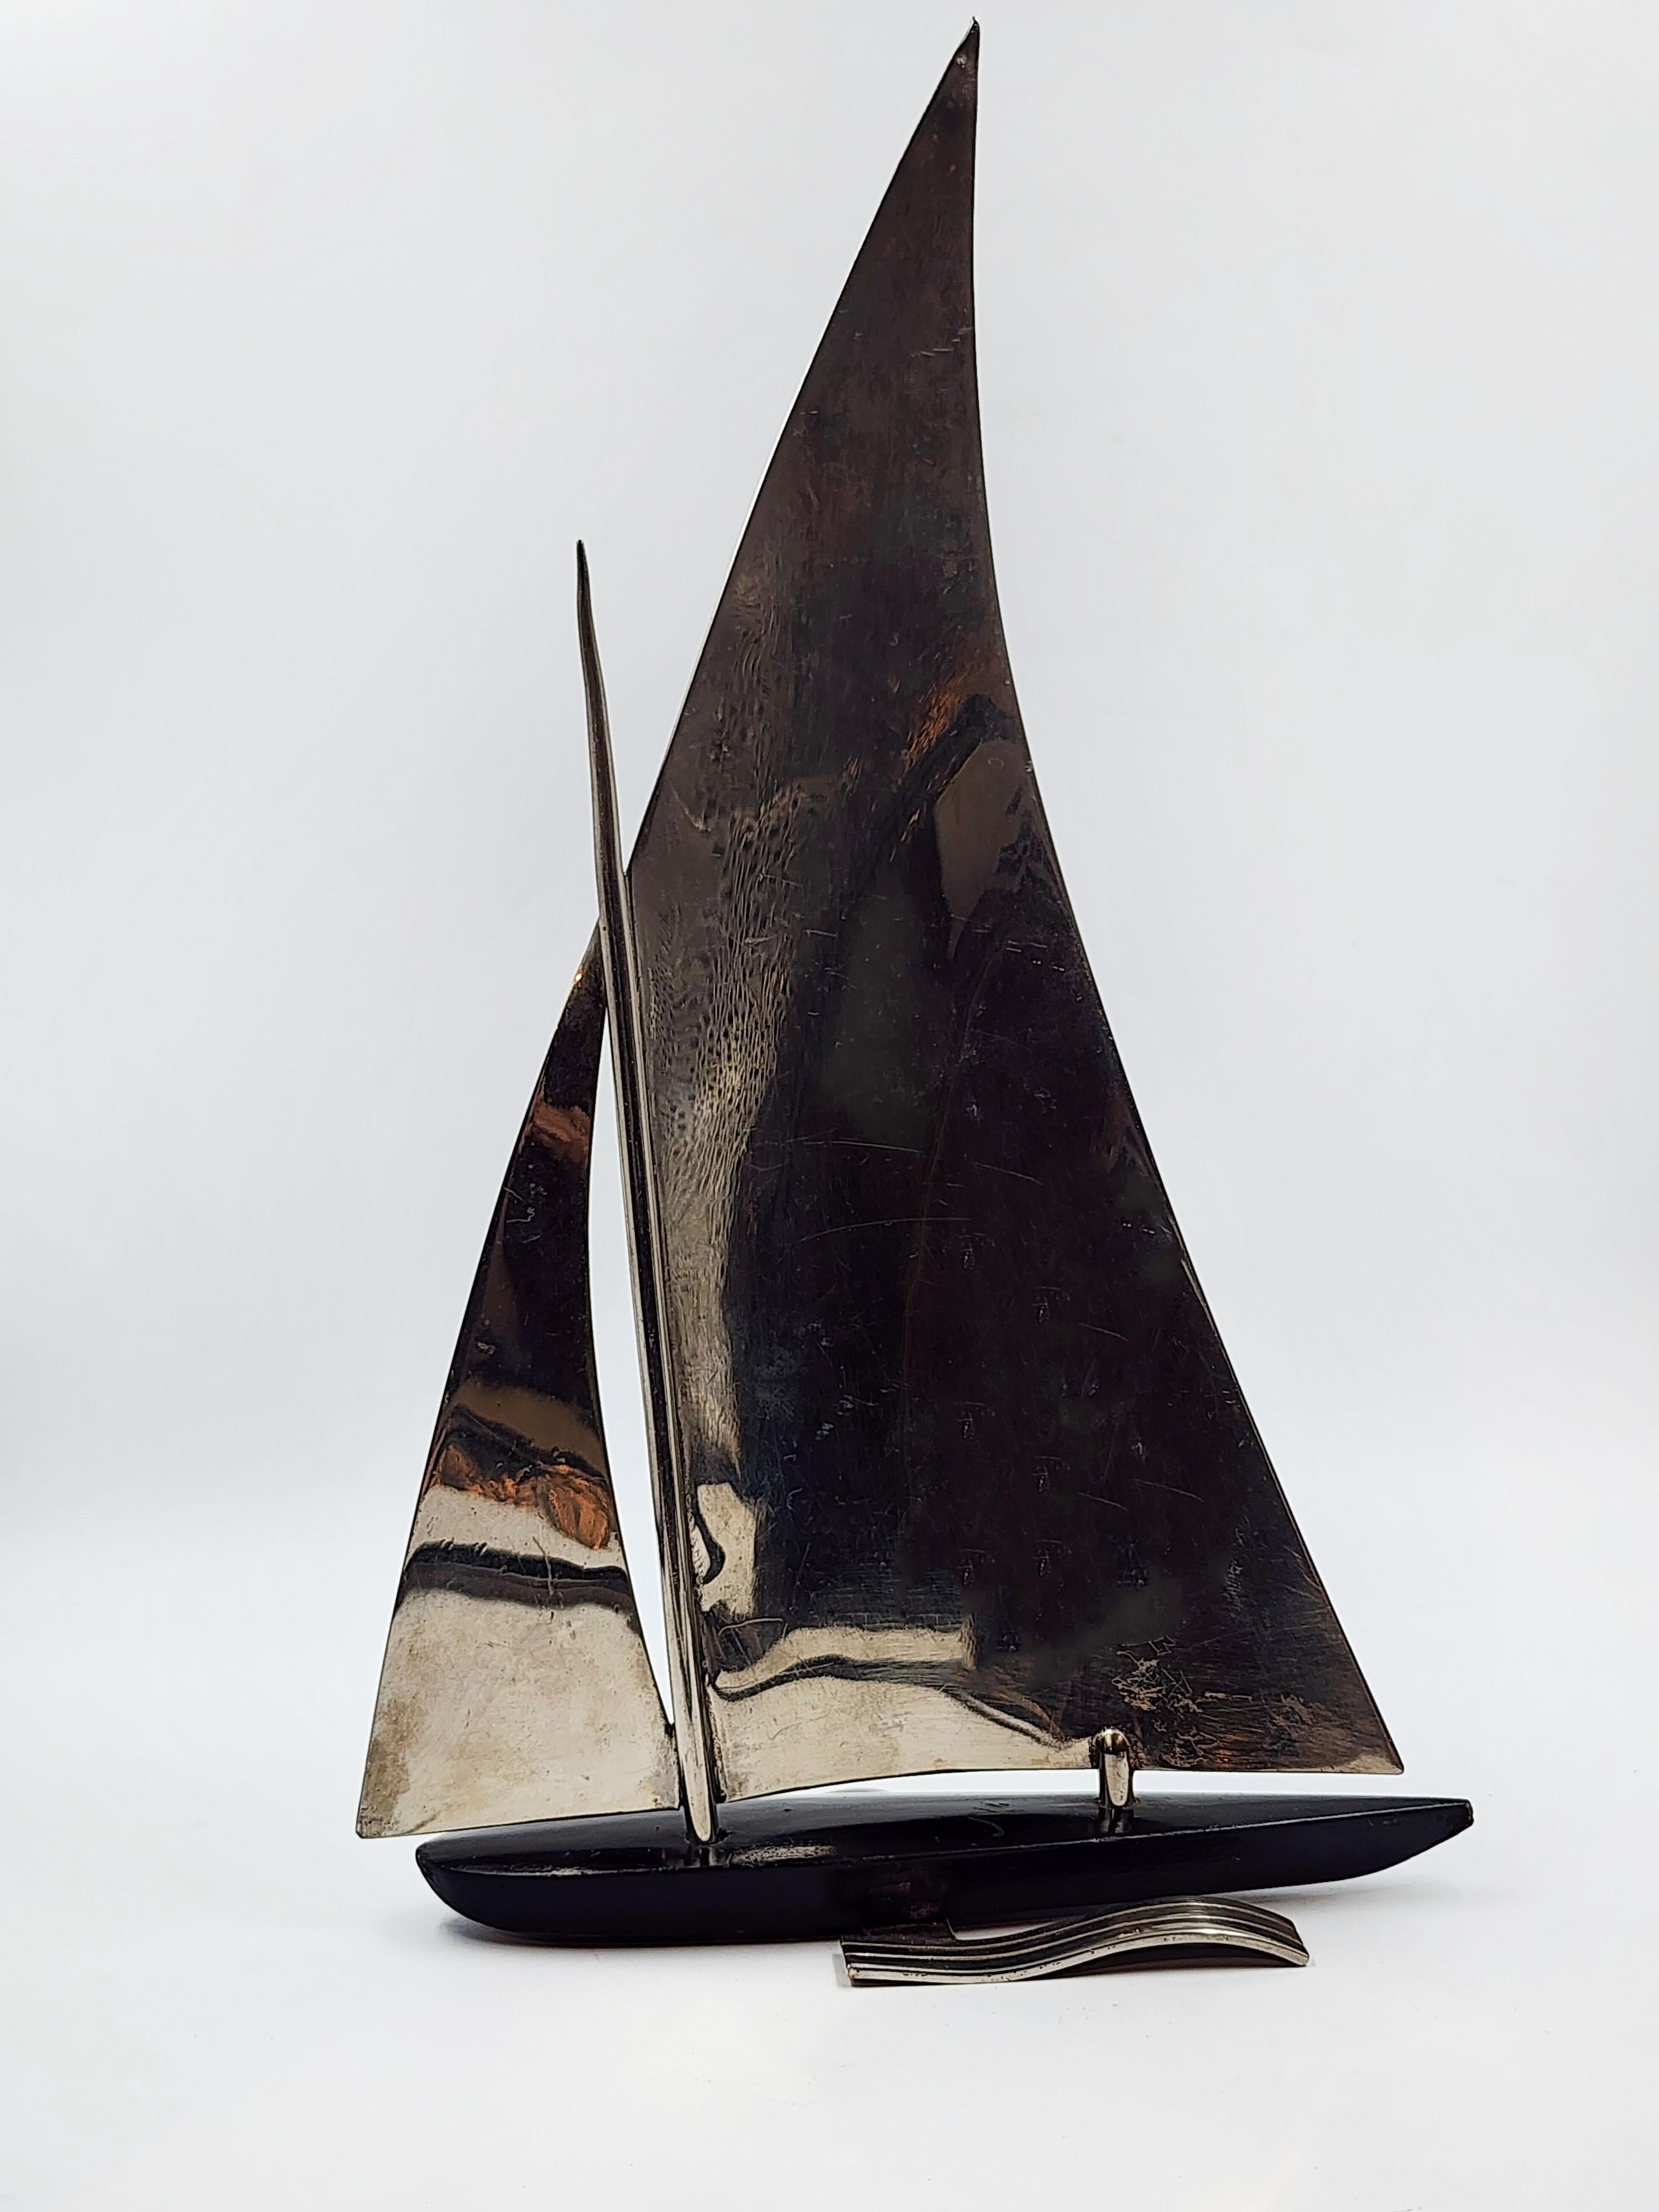 Art Deco Silver Metal Sailboat by Hagenauer
Elegant Art Deco figure of a stylized sailboat in silver metal, with ebony wood hull by Karl Hagenauer, 20th century Austrian designer
Measures:
Height: 28 centimeters
Length: 17 centimeters
Depth: 6